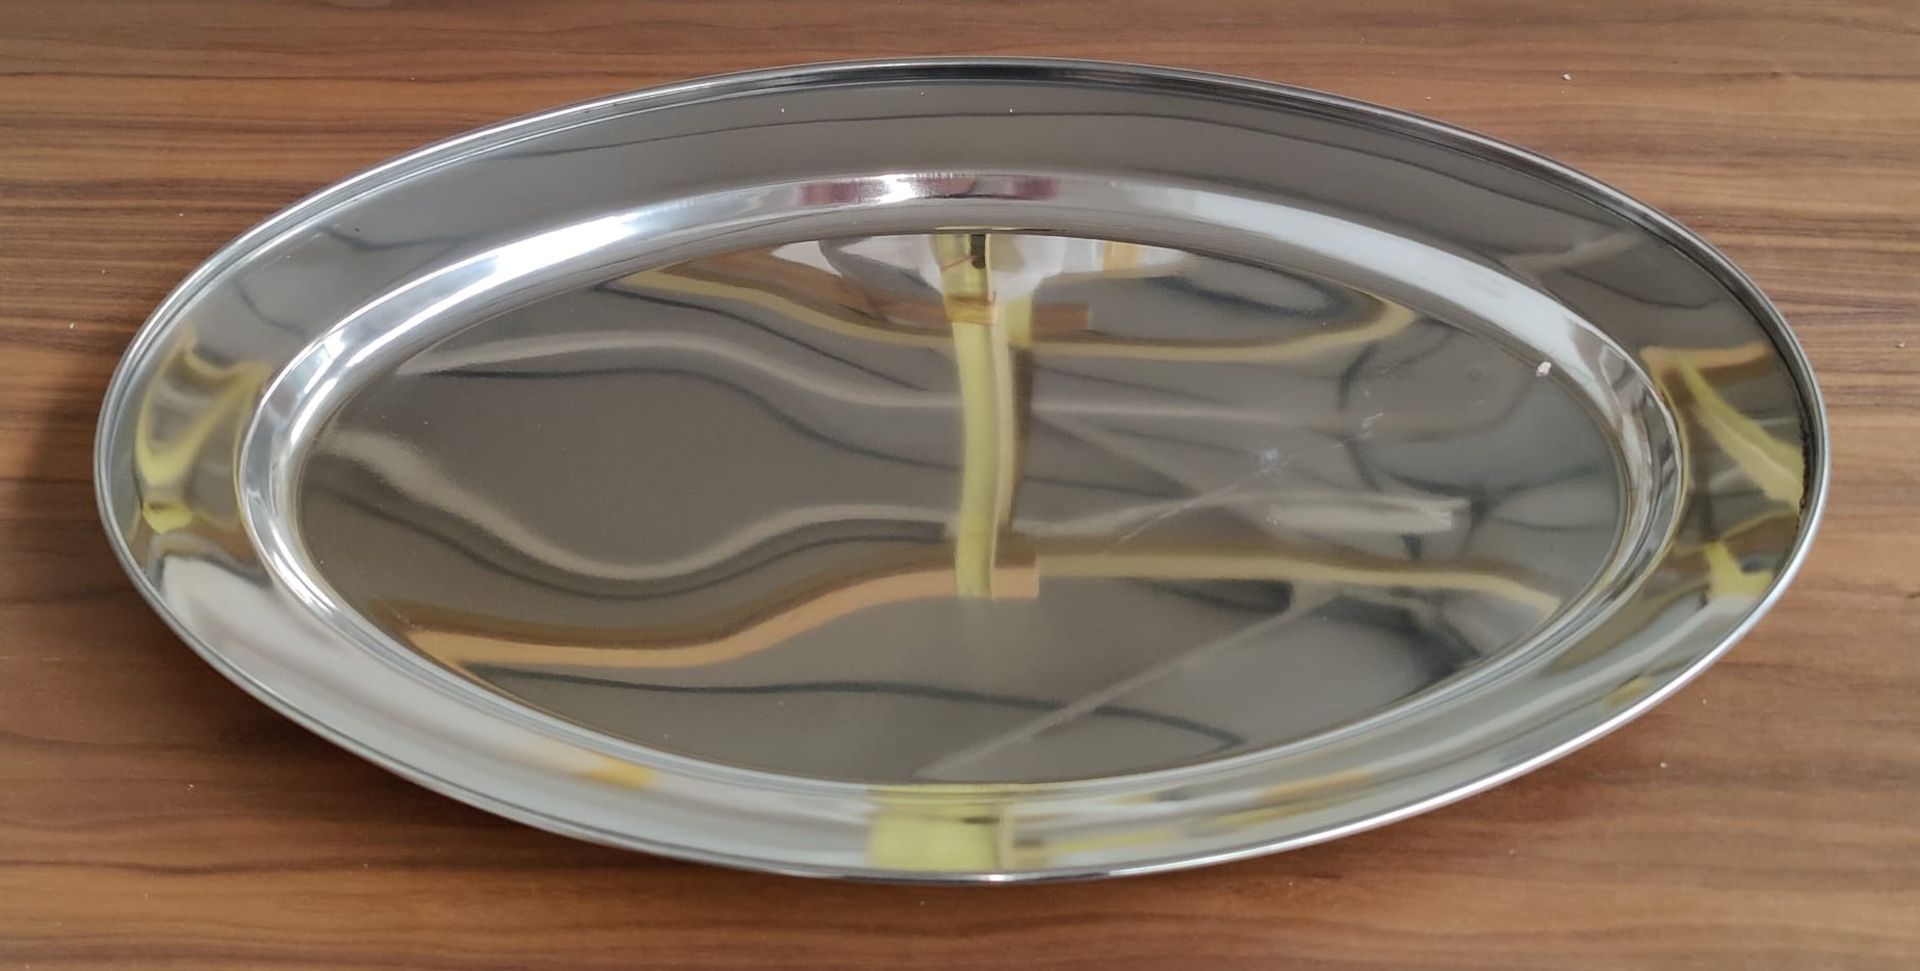 20 x Stainless Steel Oval Service Trays - Size: 450mm x 310mm - Brand New Boxed Stock - RRP £200 - Image 4 of 8